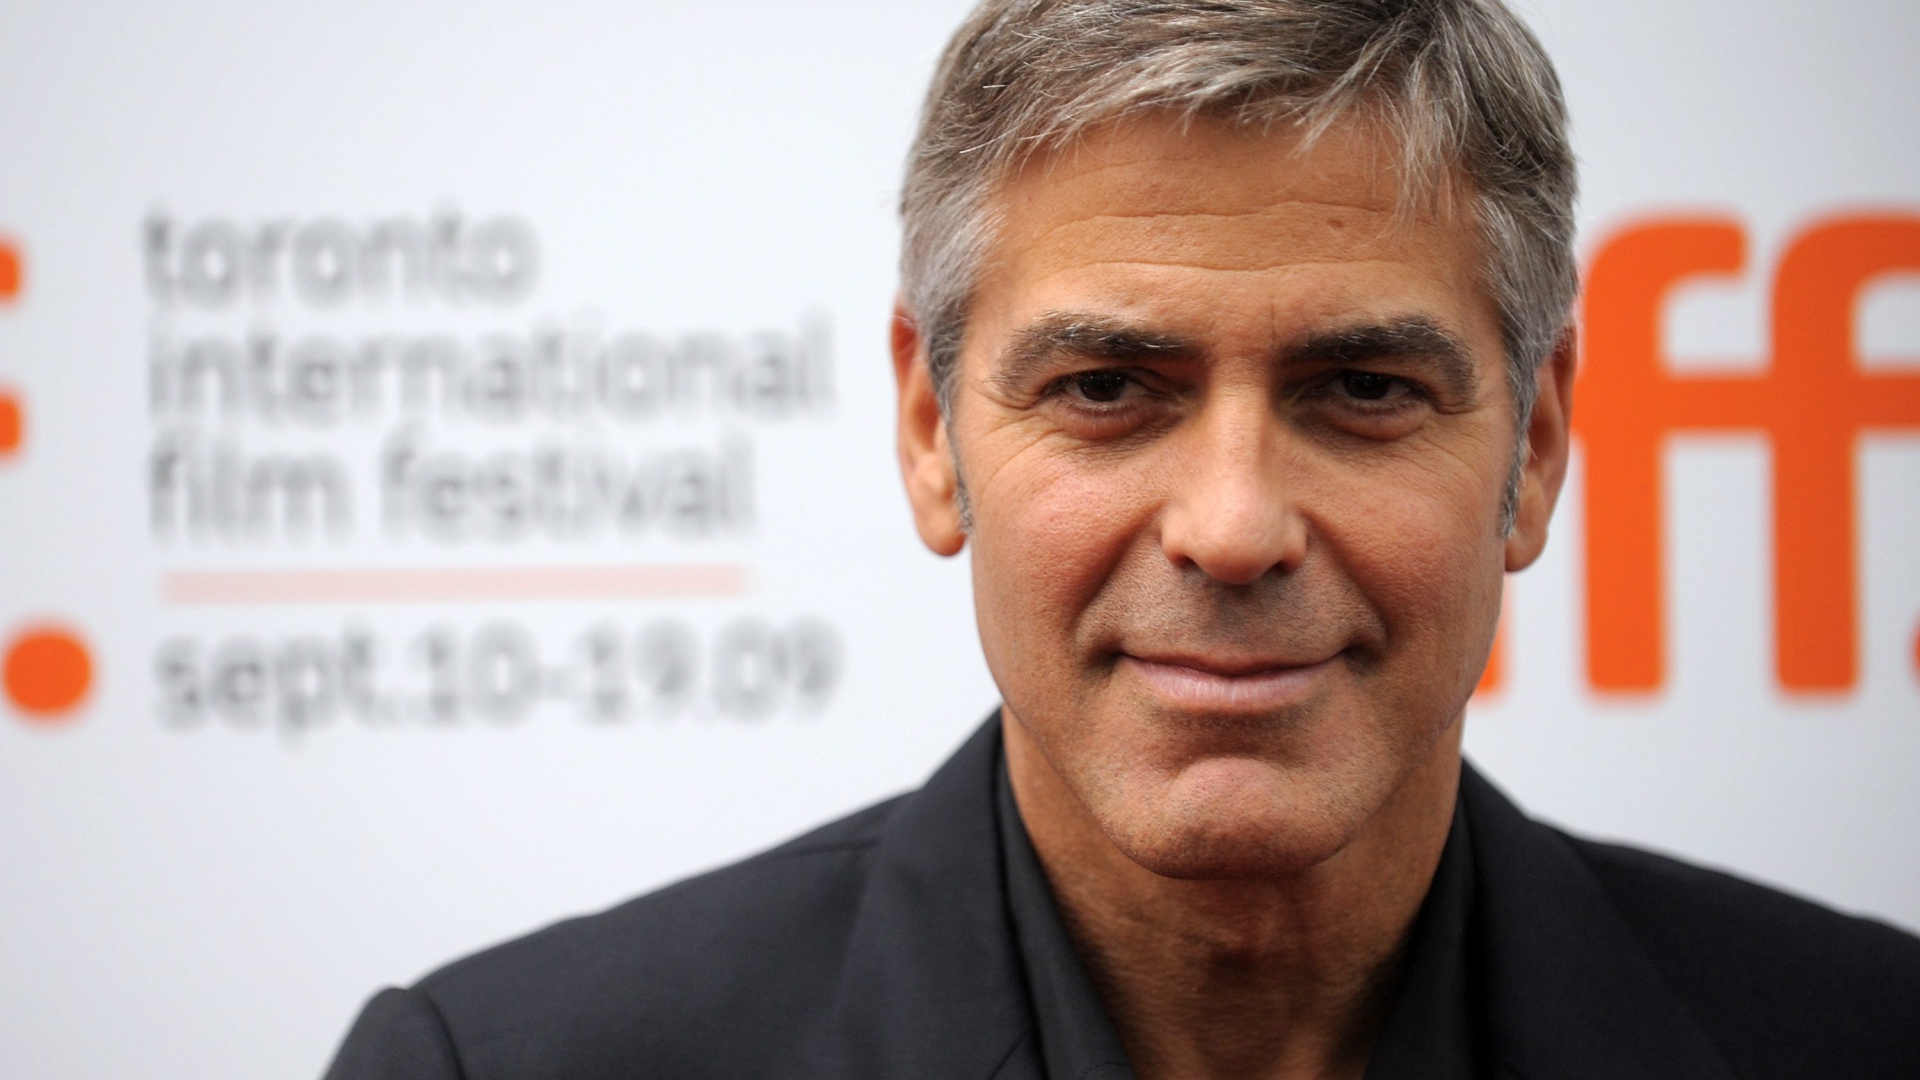 Download 1920x1080 HD Wallpaper george clooney face grey haired